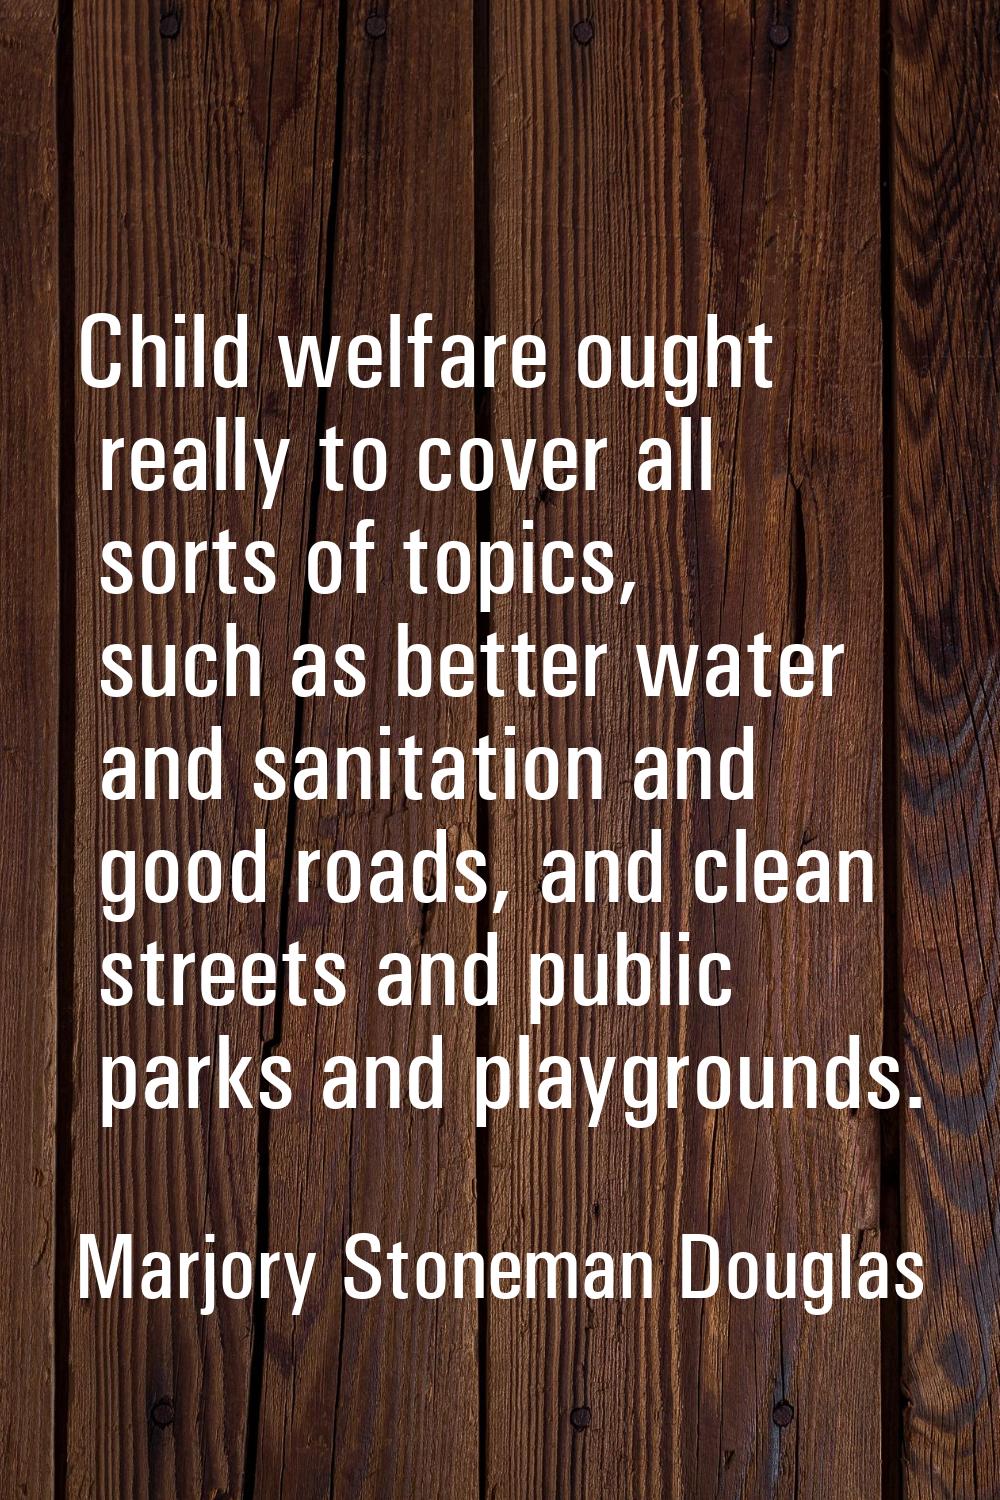 Child welfare ought really to cover all sorts of topics, such as better water and sanitation and go